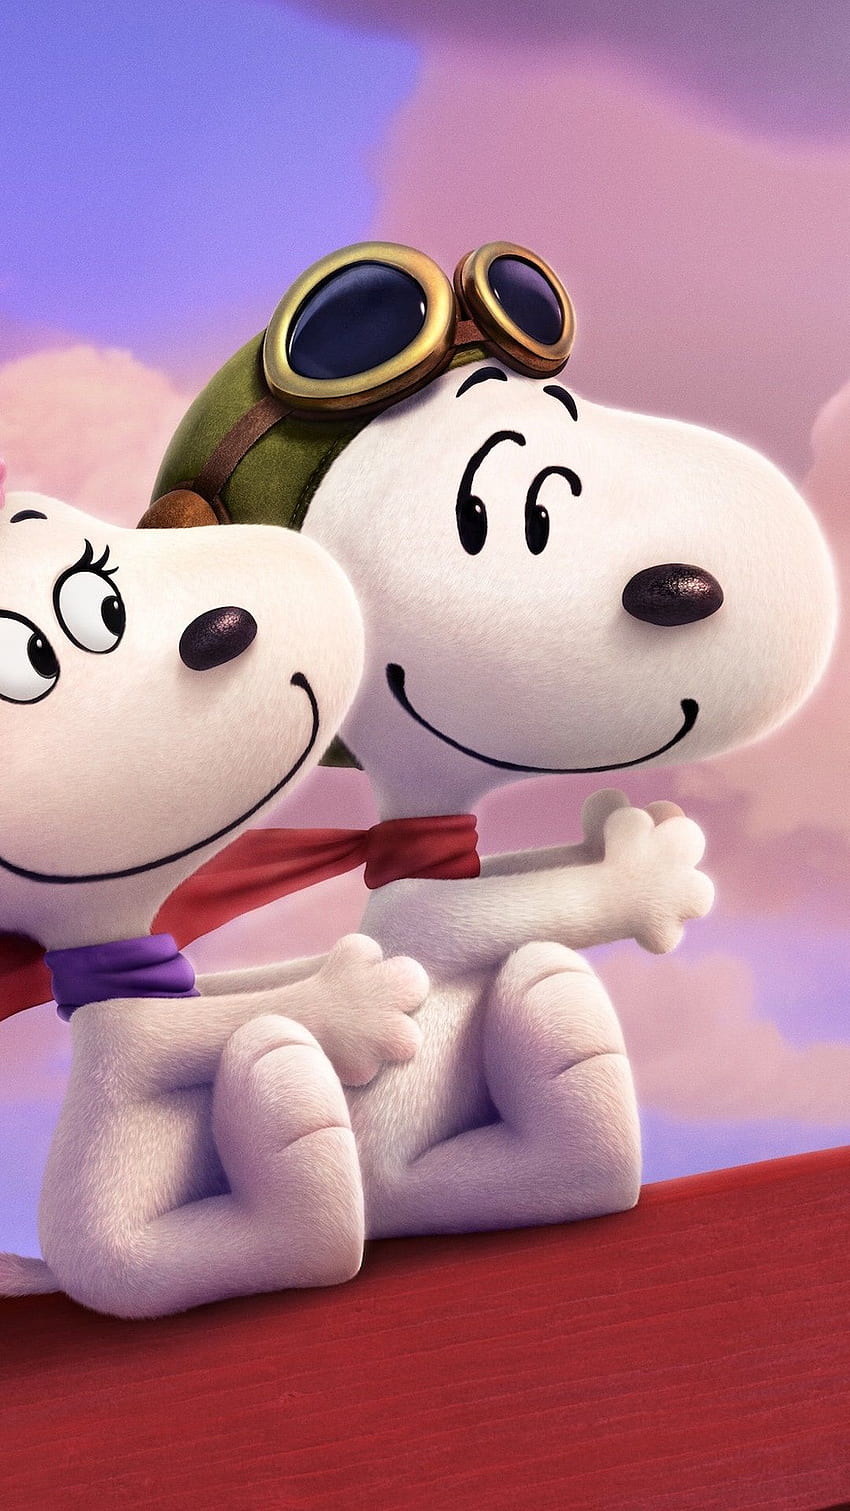 Snoopy And Fifi In The Paris IPhone 8 7 6 6S Plus HD phone wallpaper